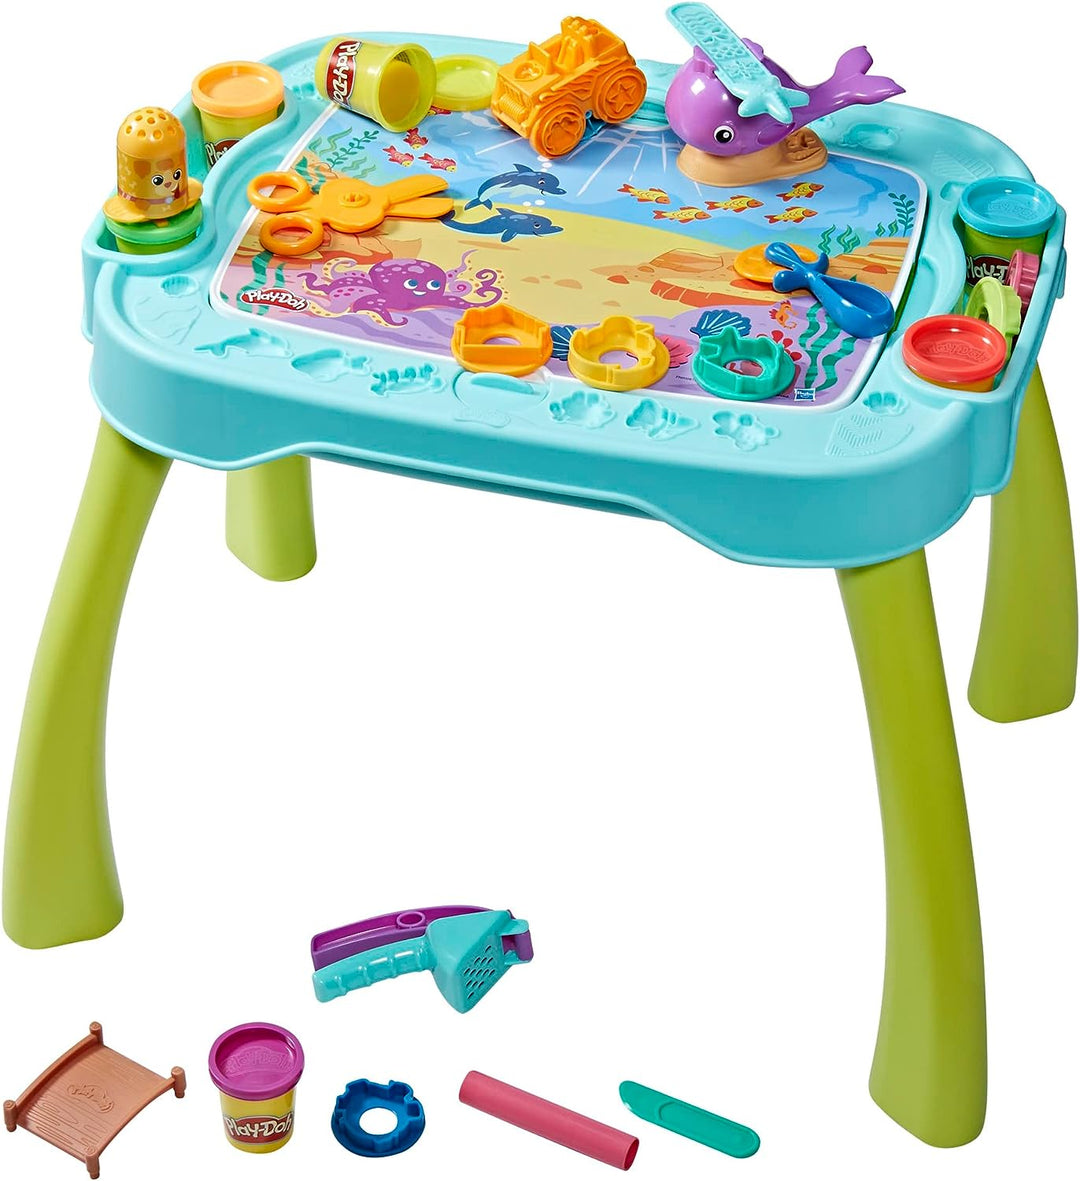 Play-Doh All-in-One Creativity Starter Station Kids Toys For Ages 3+ Years